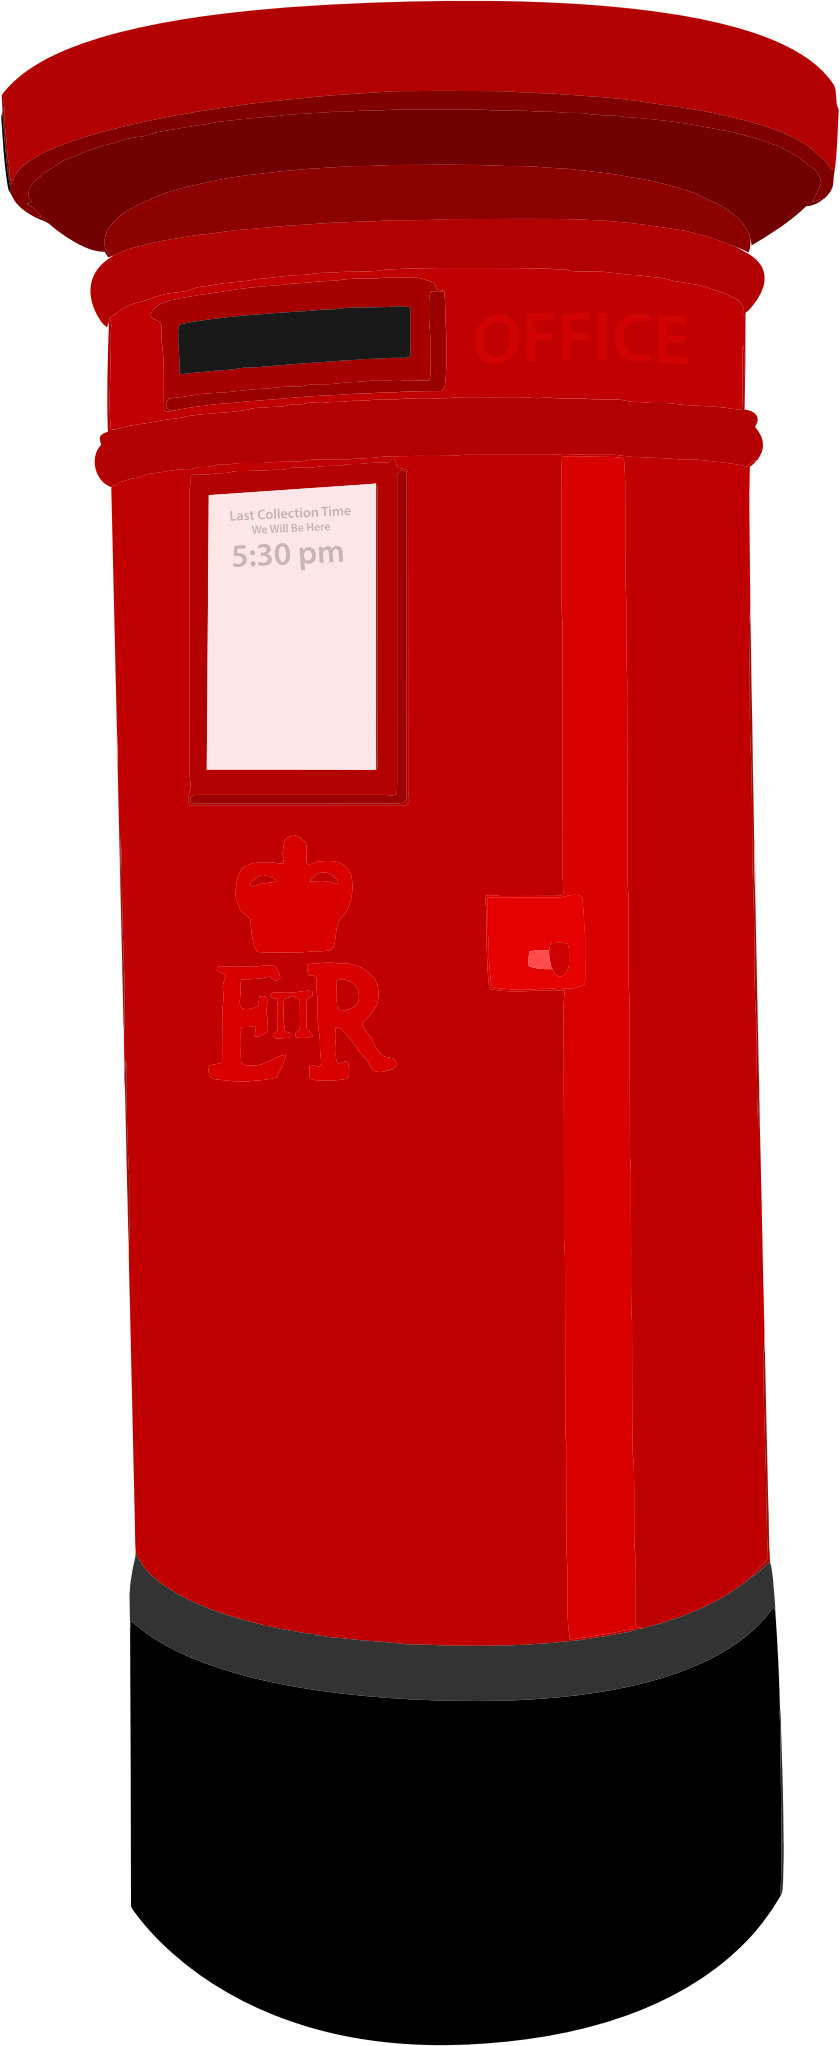 Post Box Clipart Icons PNG - Free PNG and Icons Downloads